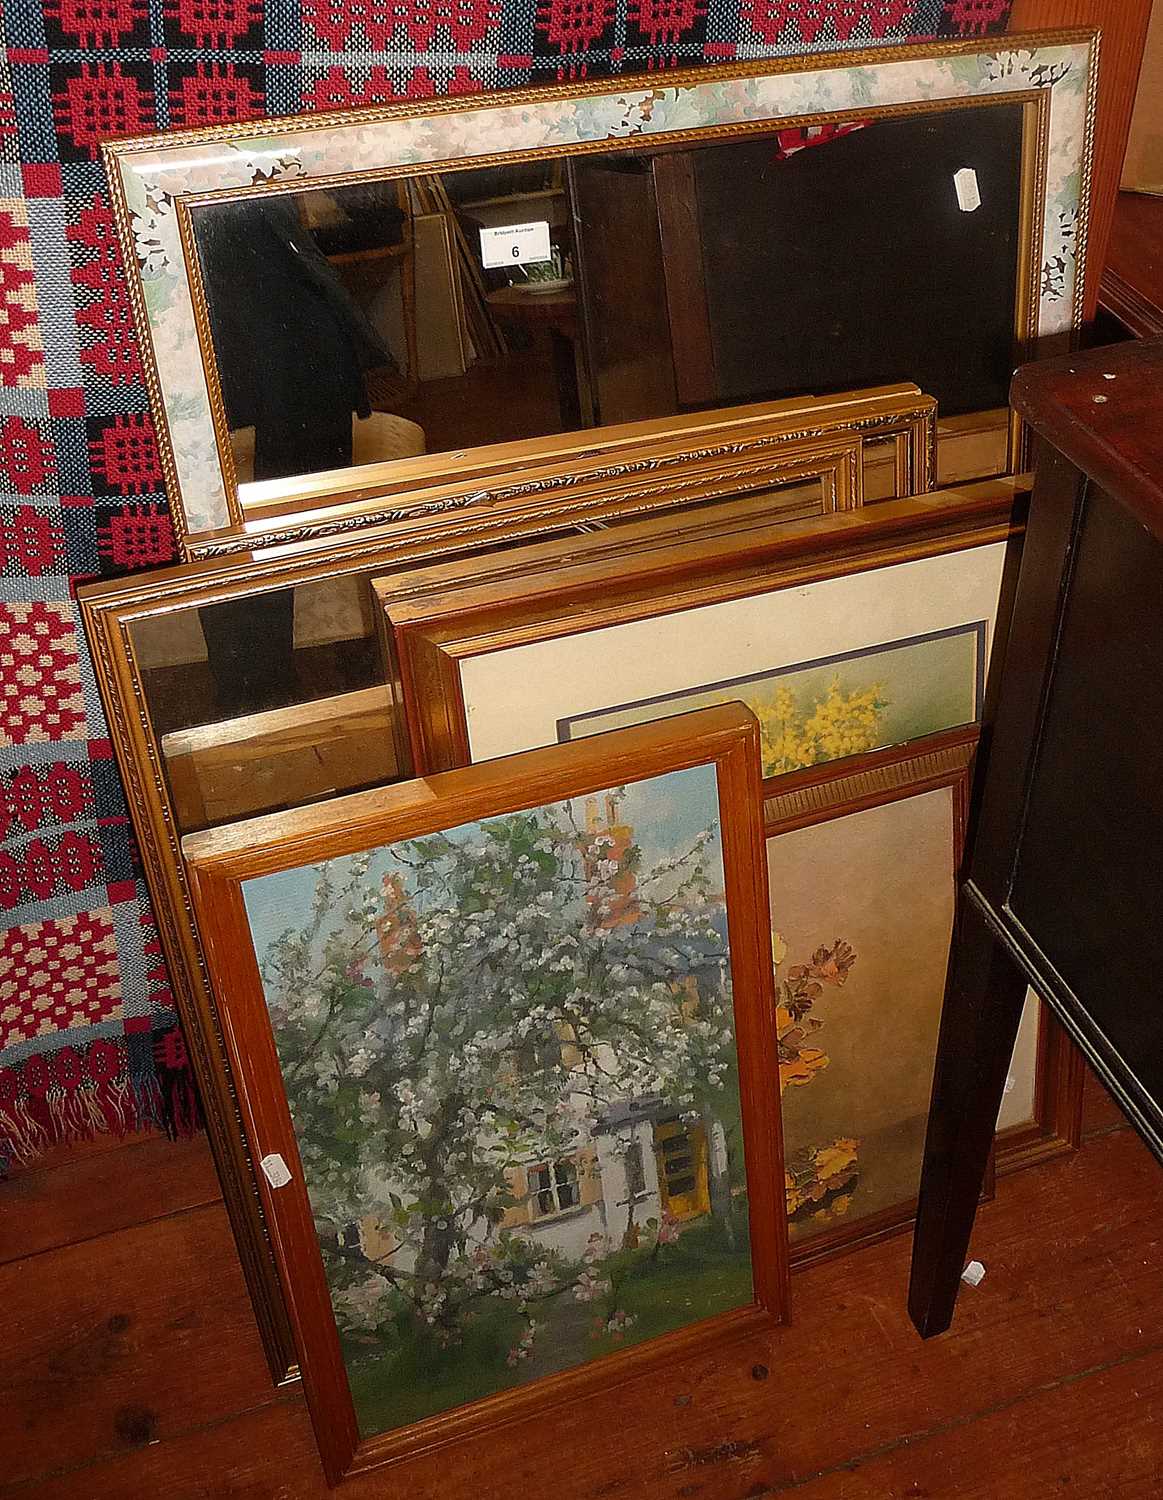 Three gilt-framed wall mirrors, two prints and an oil on board of a garden